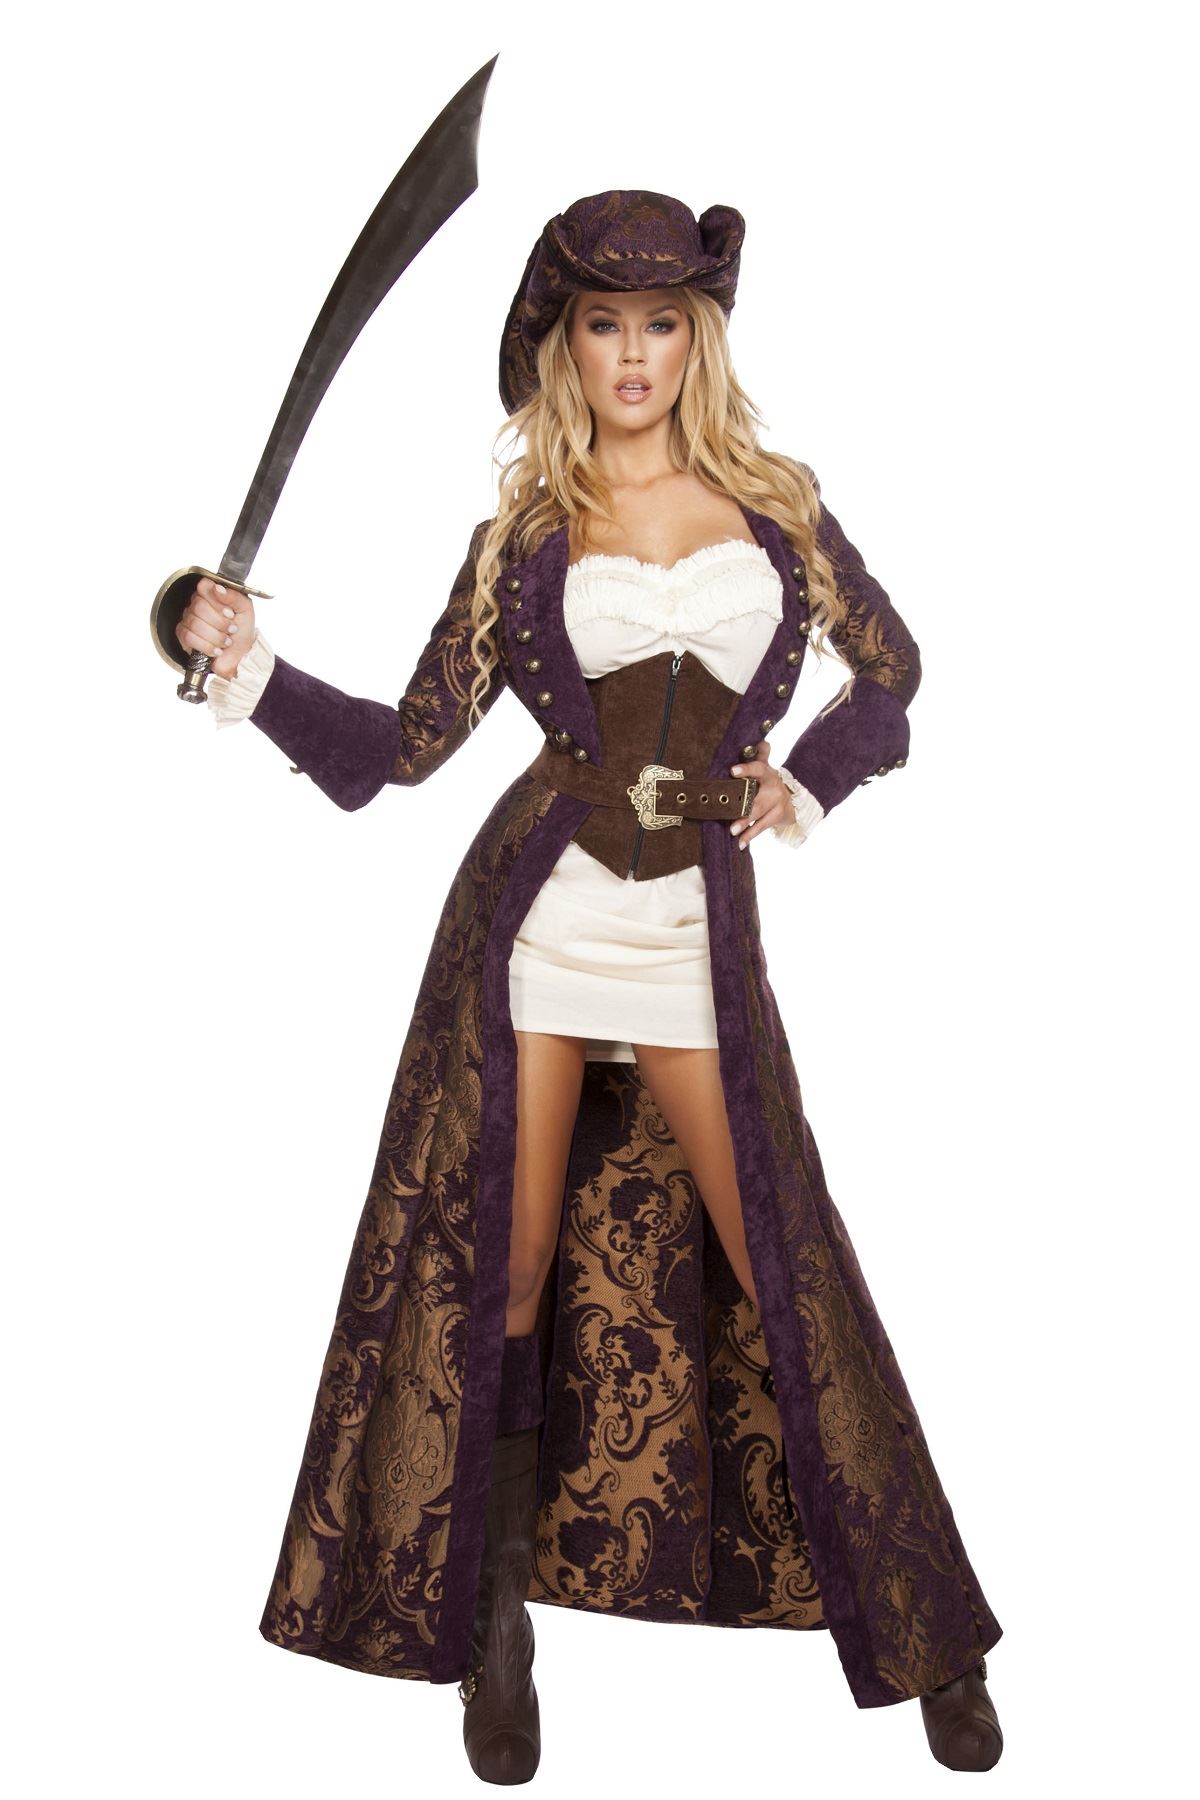 Adult Decadent Pirate Diva Woman Deluxe Costume 22999 The Costume Land 9693